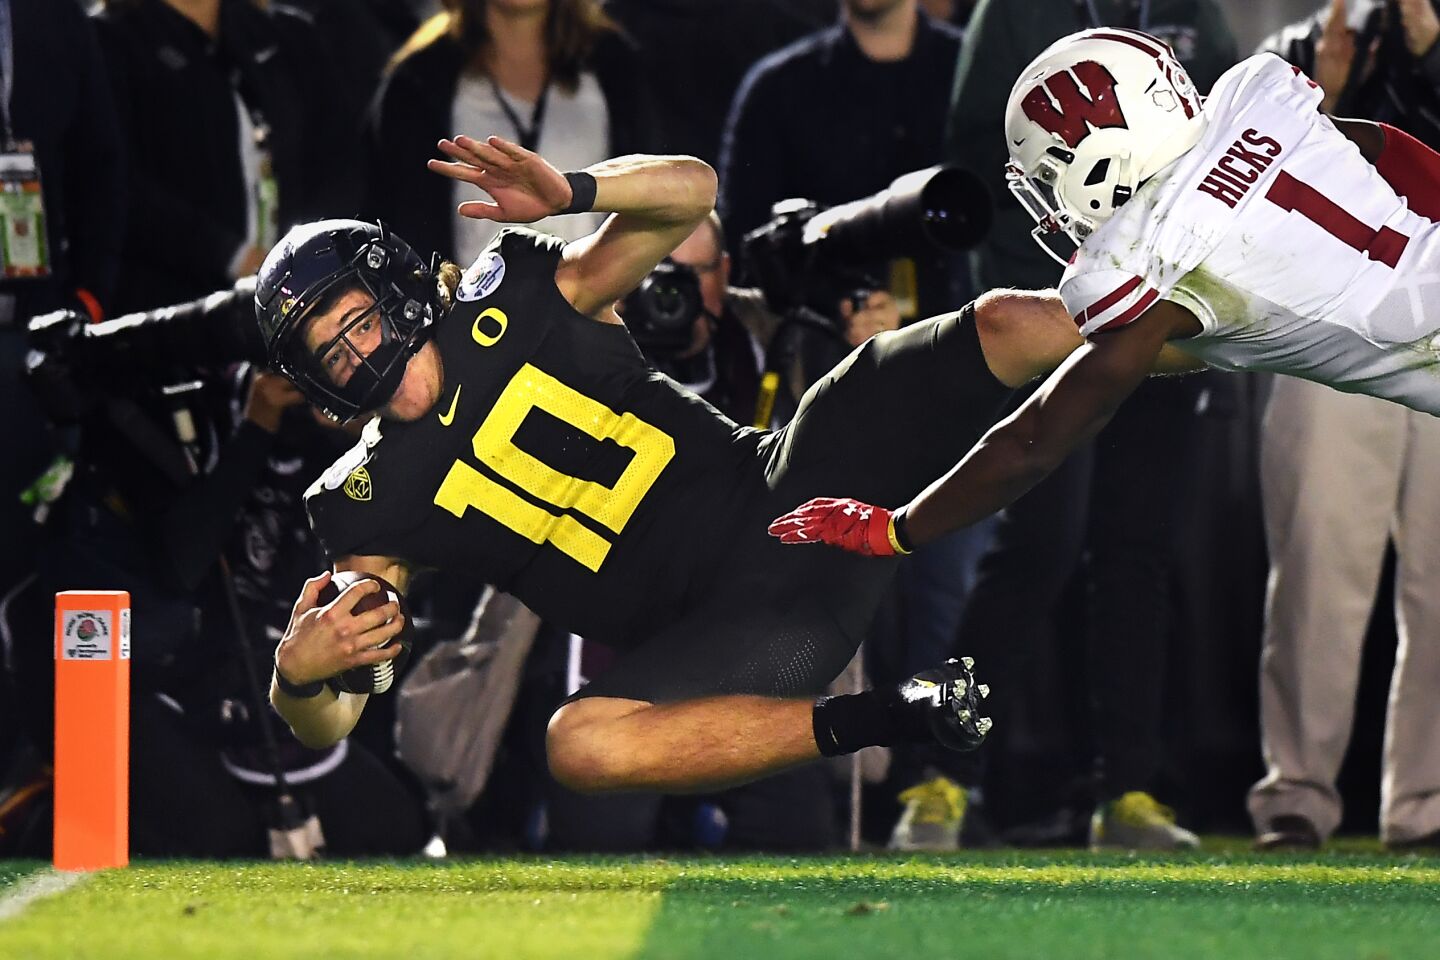 Oregon quarterback Justin Herbert scores the go-ahead touchdown in front of Wisconsin cornerback Faion Hicks during the fourth quarter.